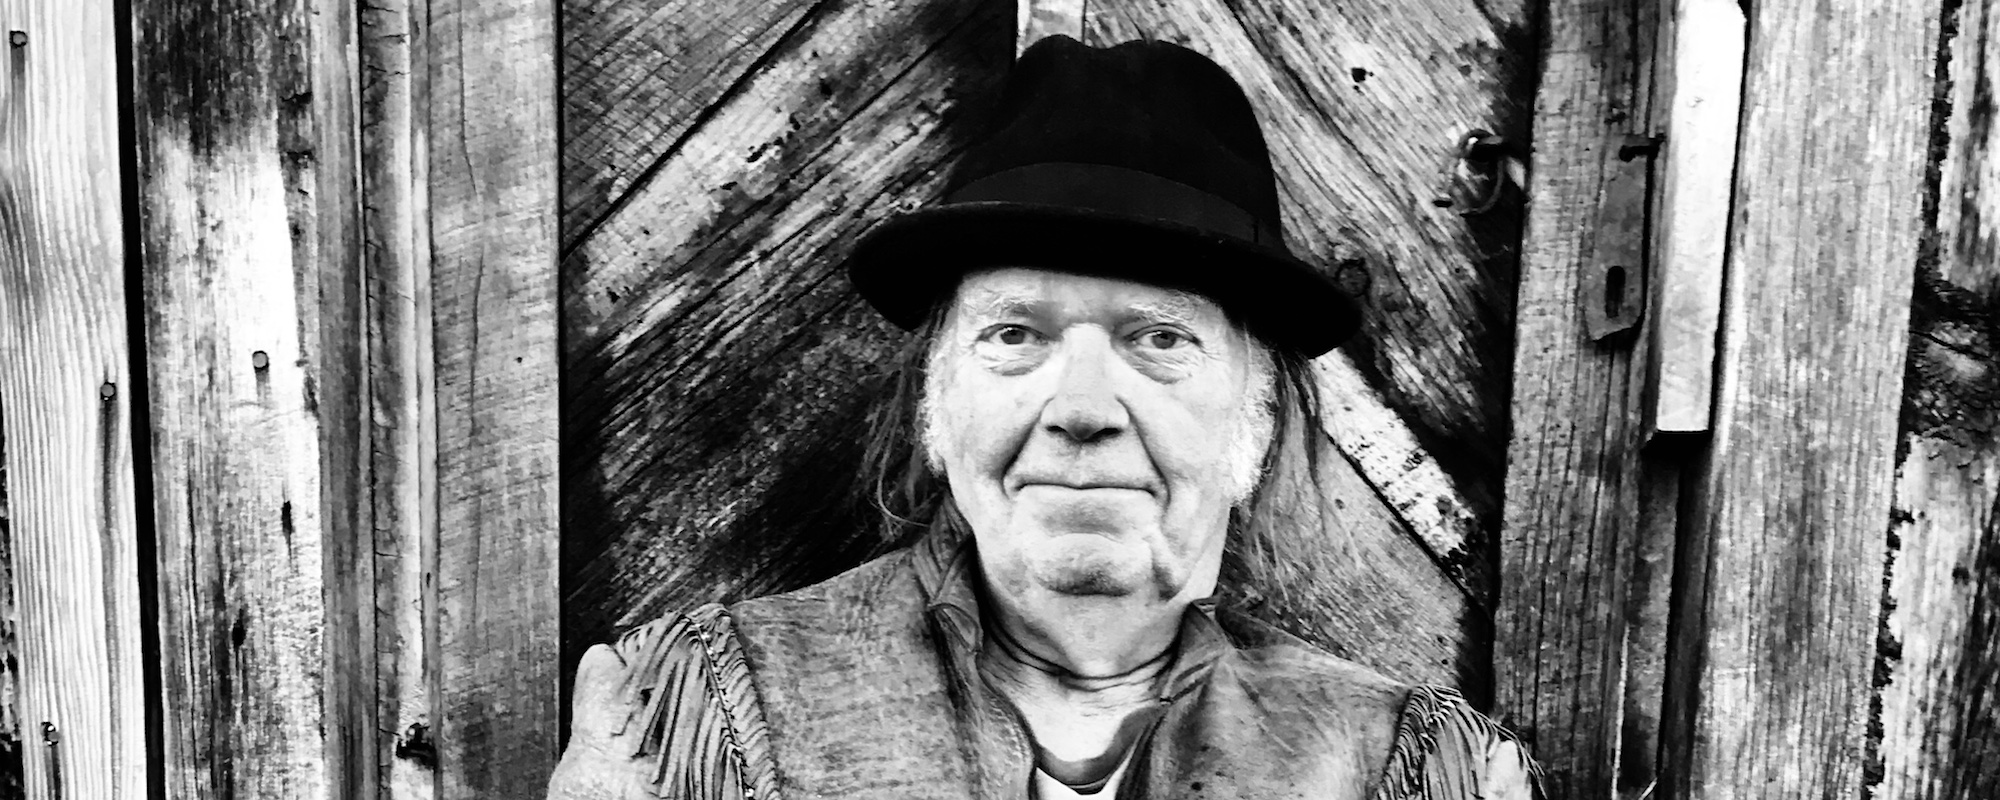 SiriusXM Revives “Neil Young Radio” After Spotify Removes Artist’s Catalog of Music